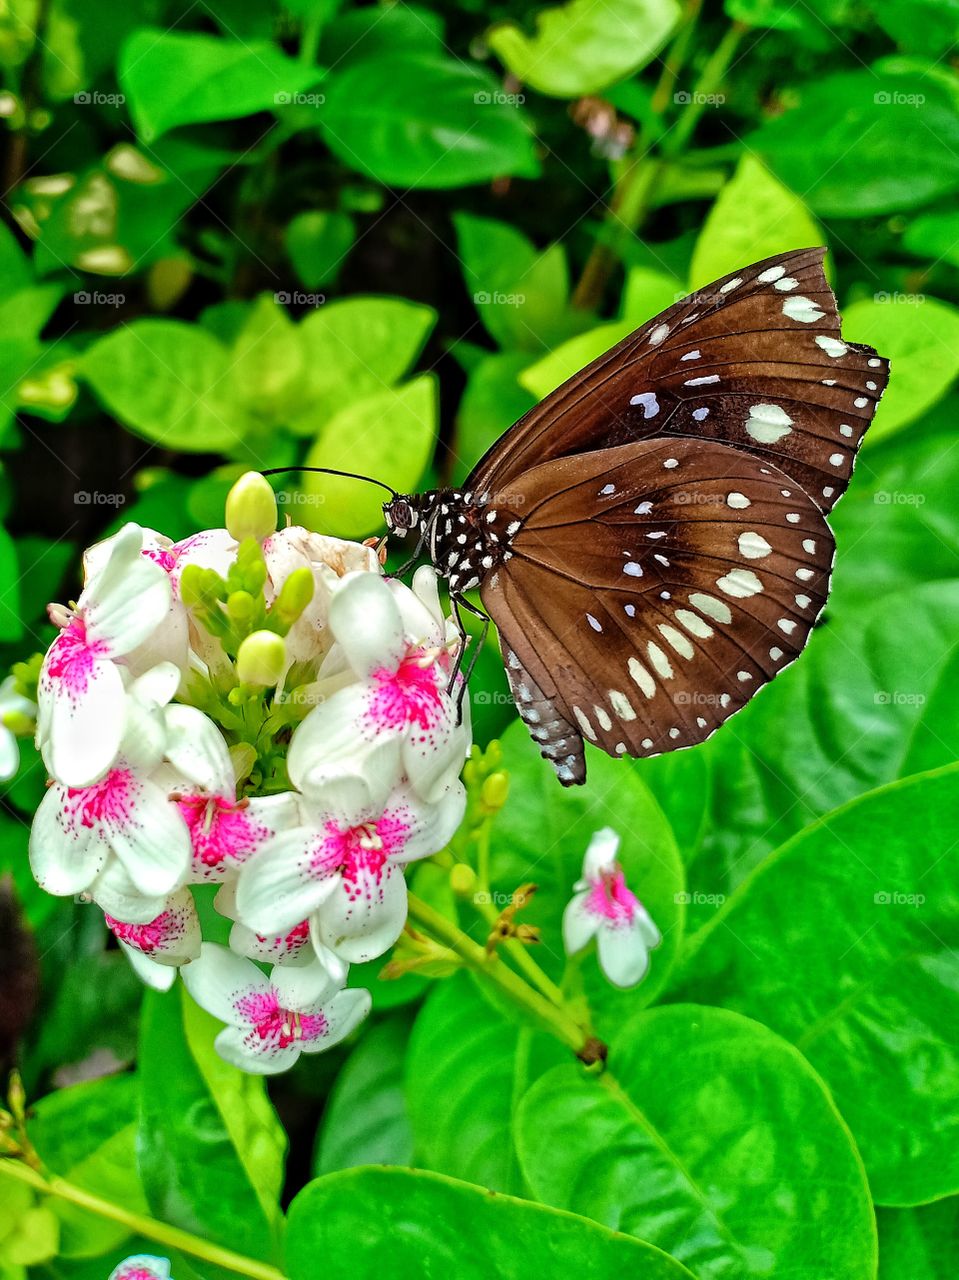 a butterfly alighted on a flower